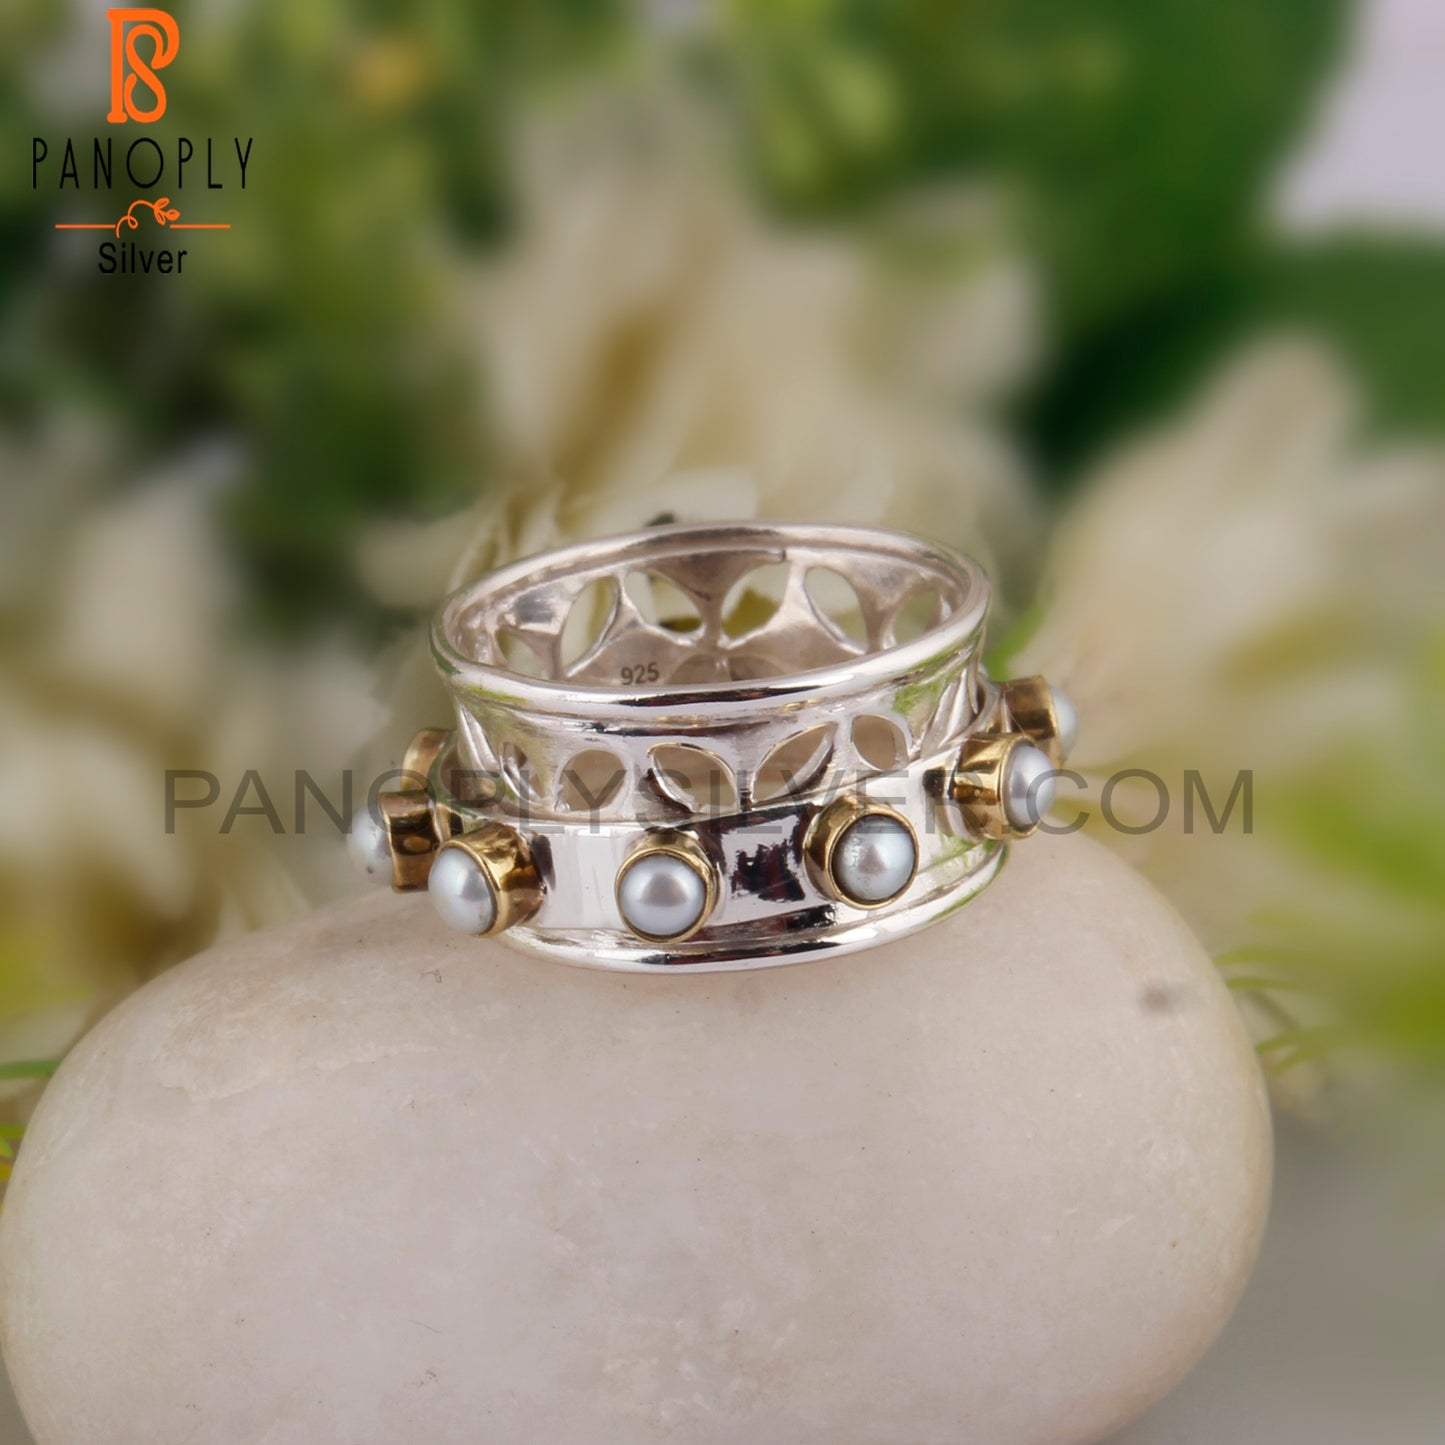 Rare Elegant Pearl Round Shape 925 Sterling Silver Ring